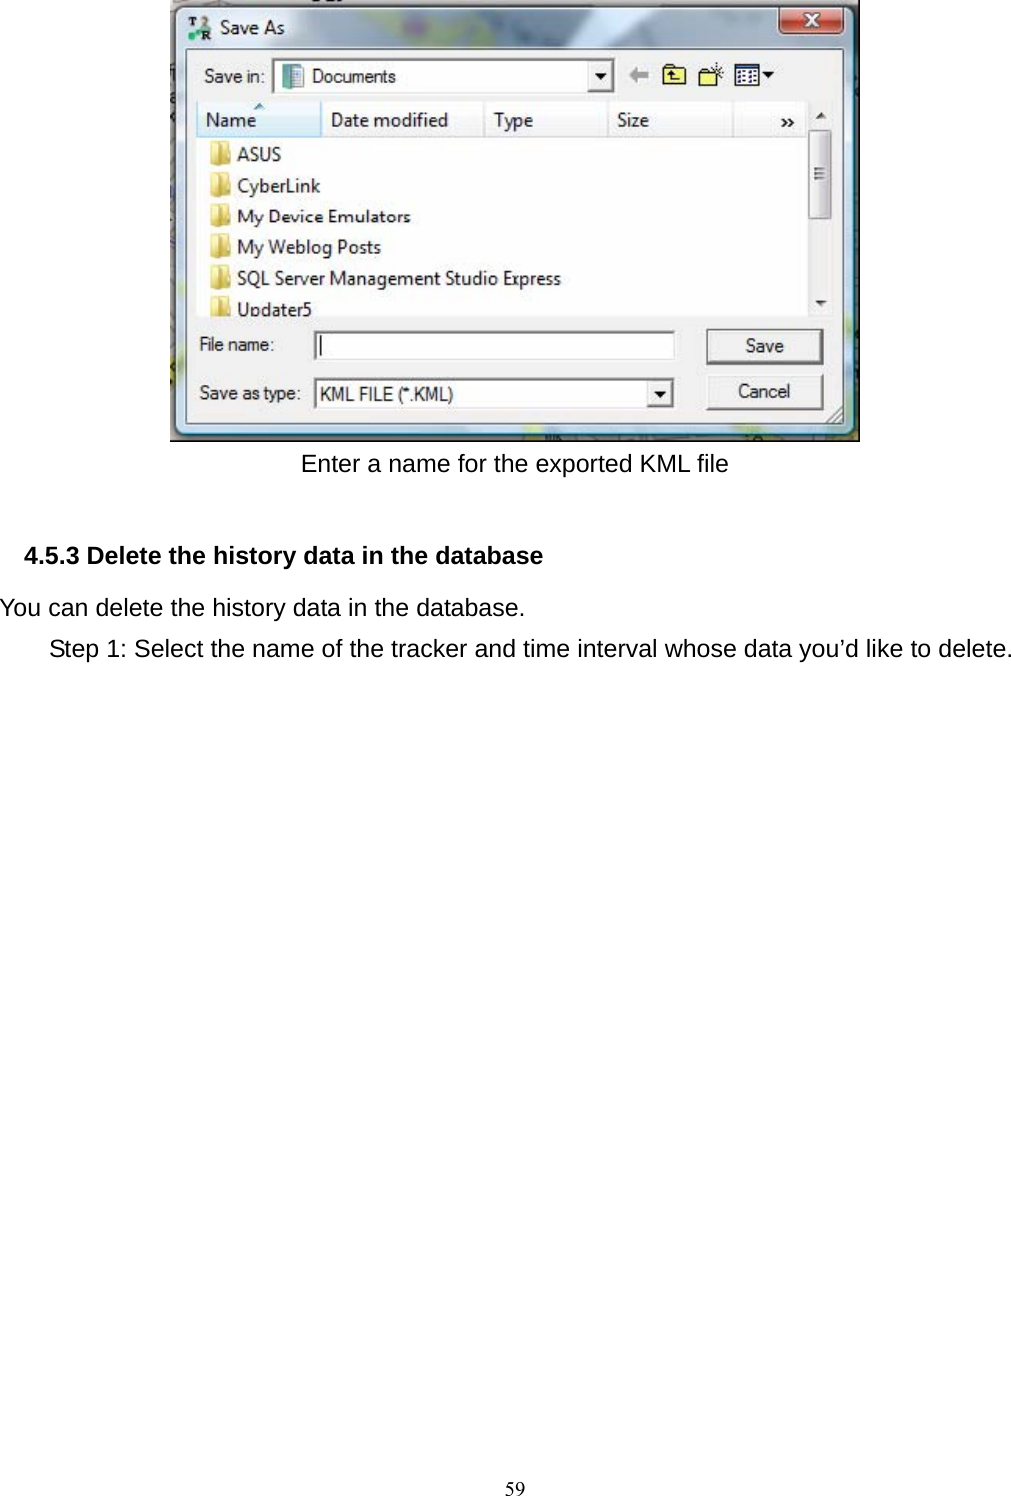  Enter a name for the exported KML file  4.5.3 Delete the history data in the database You can delete the history data in the database. Step 1: Select the name of the tracker and time interval whose data you’d like to delete.     59